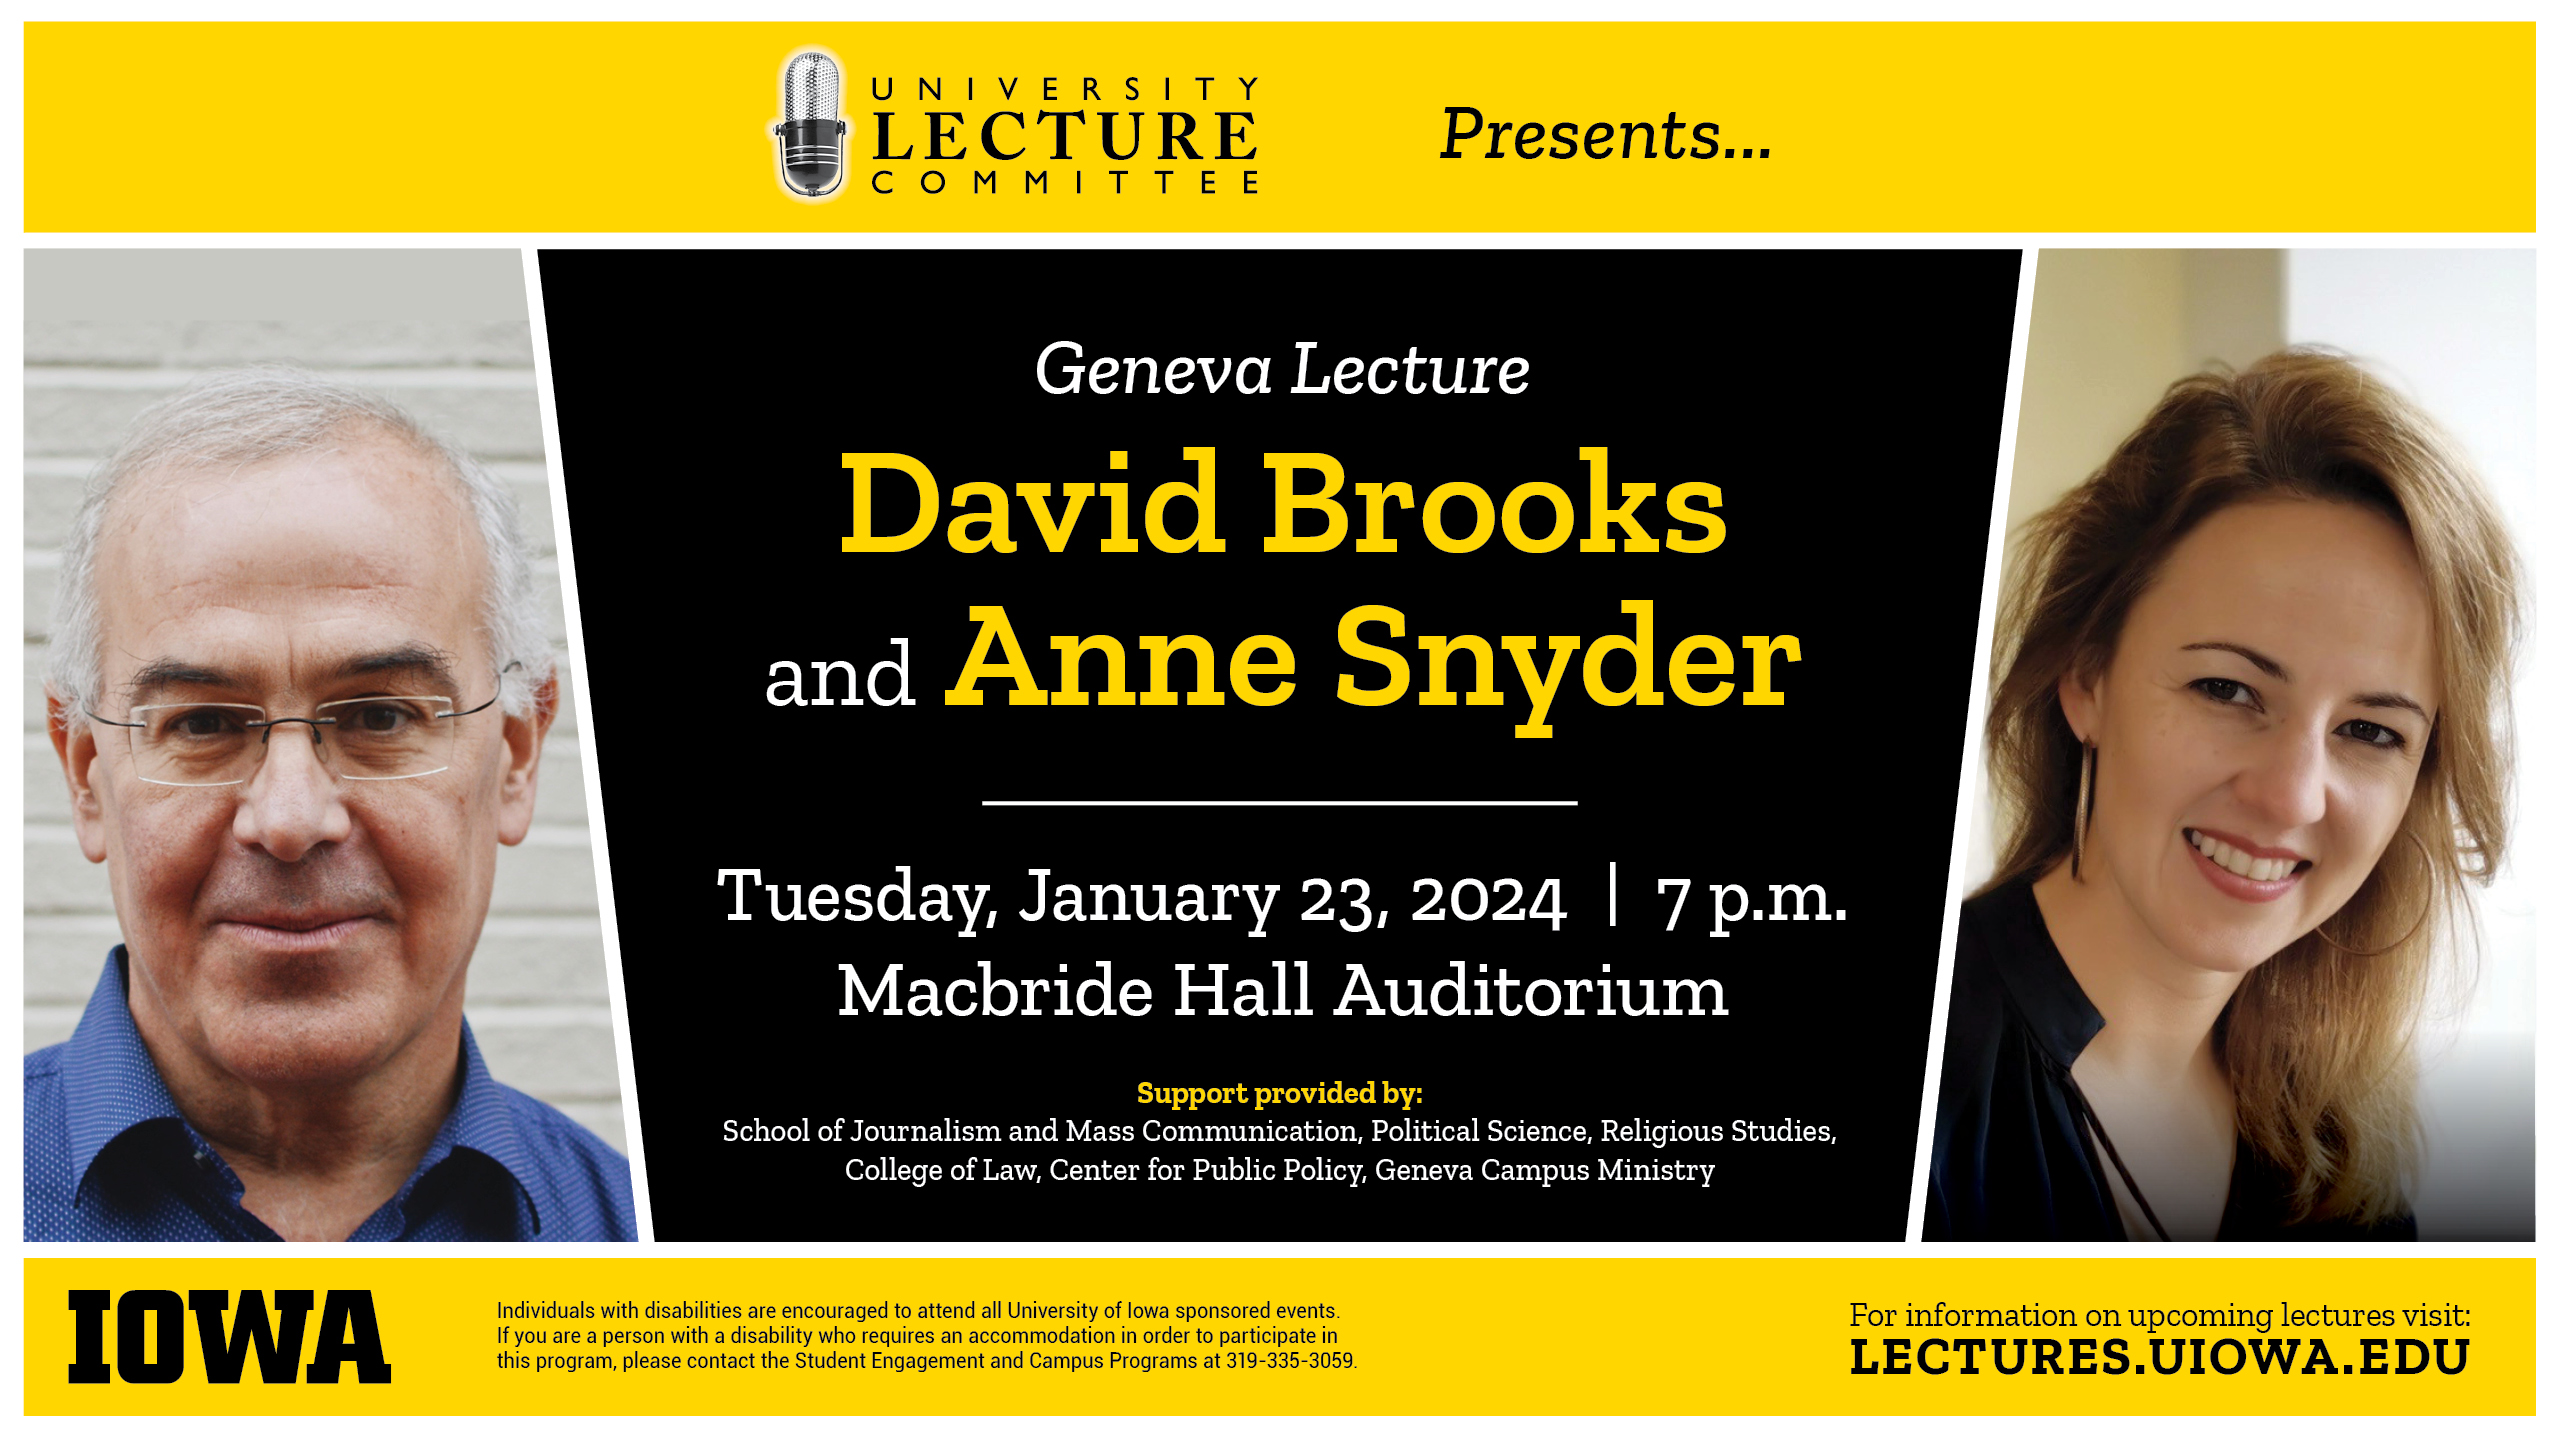 University Lecture Committee Presents: Geneva Lecture David Brooks and Anne Snyder